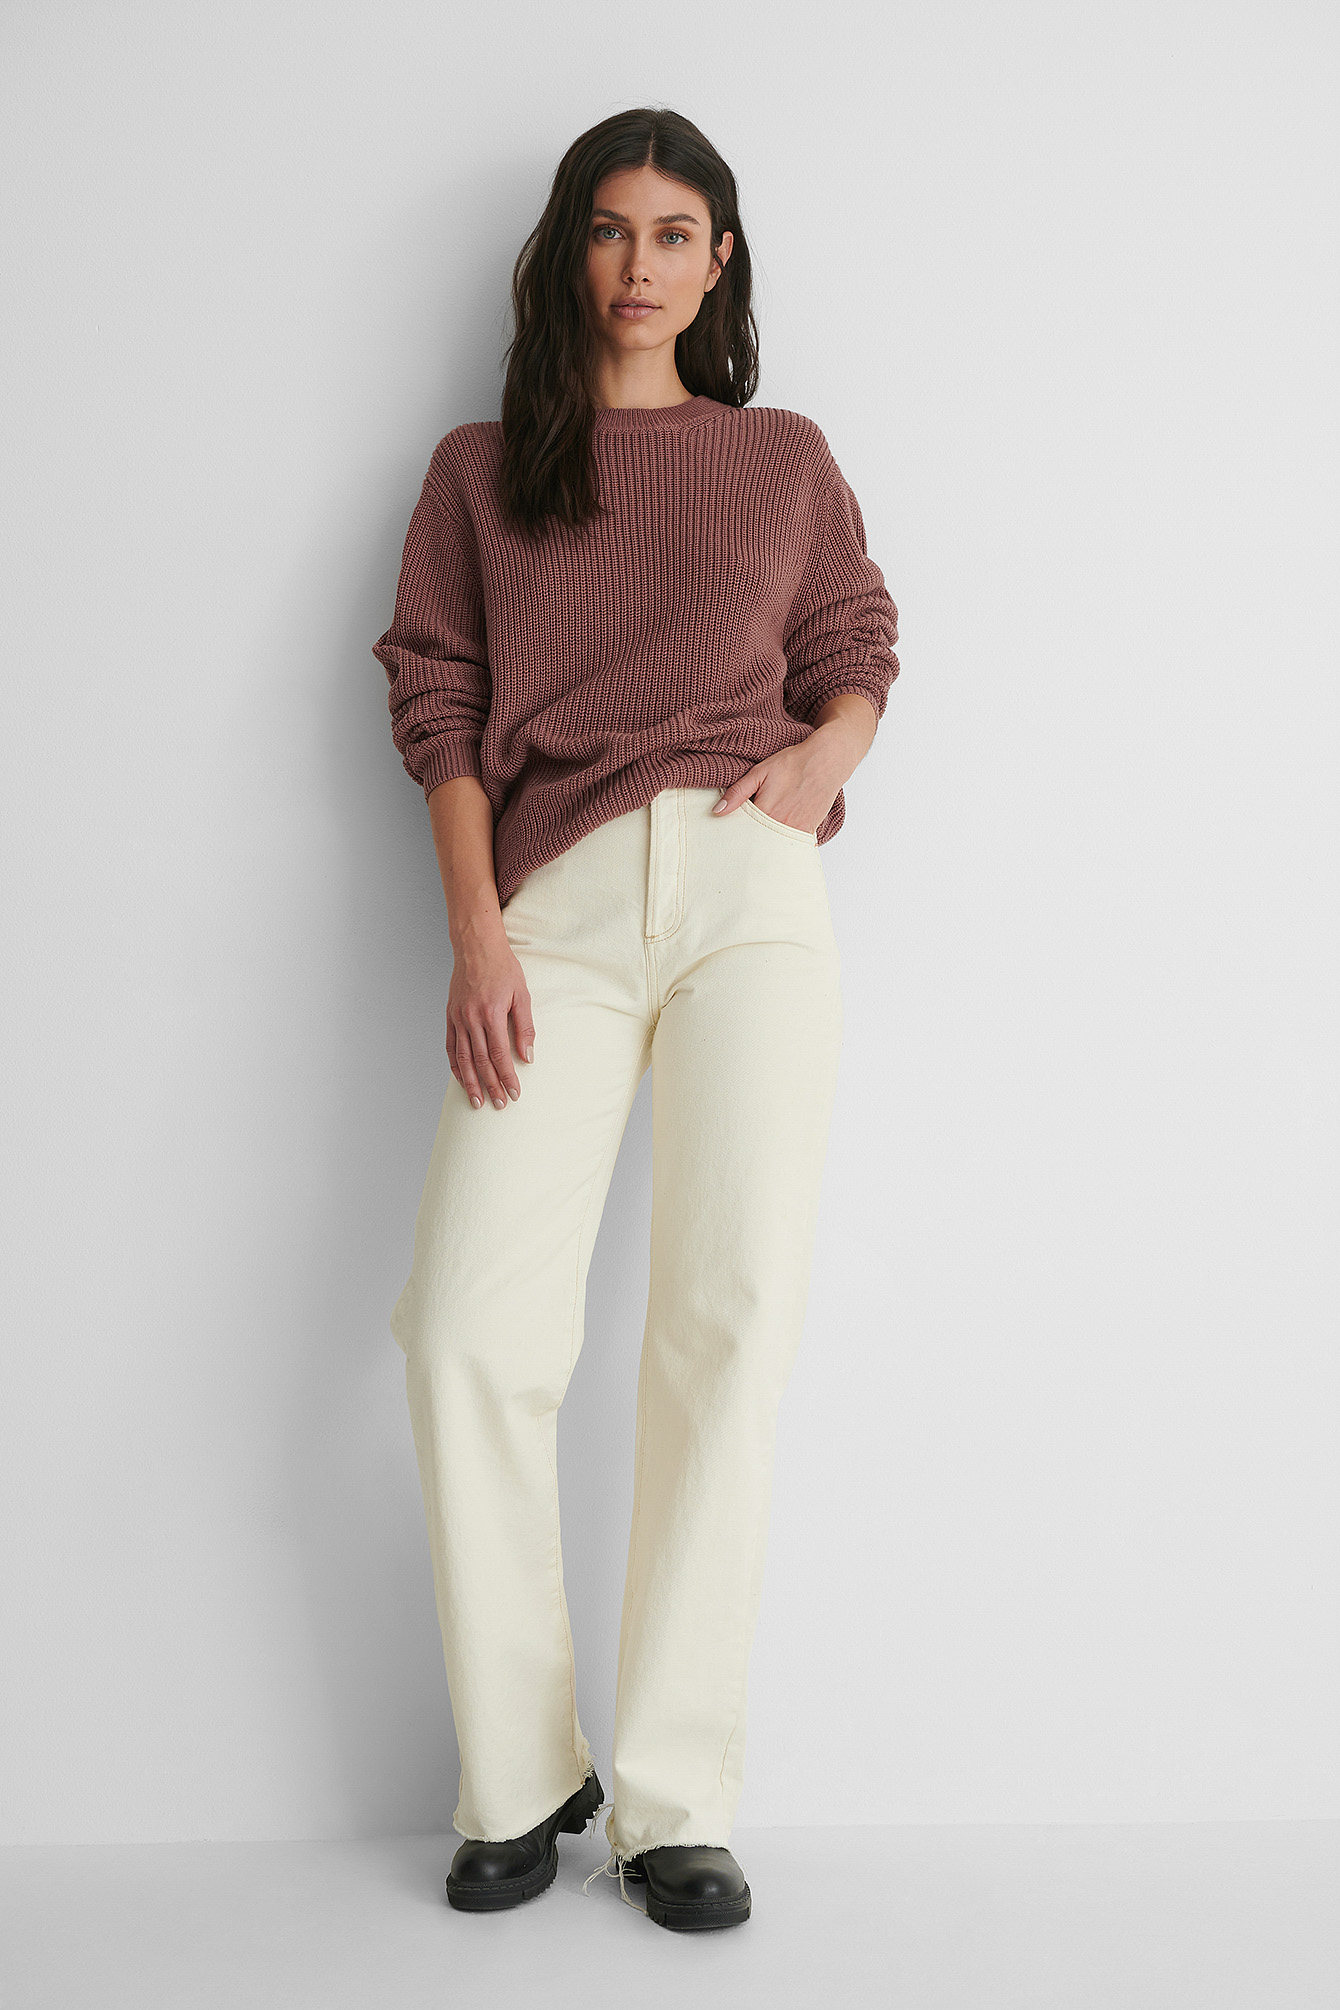 Round Neck Knitted Sweater with Offwhite Jeans.